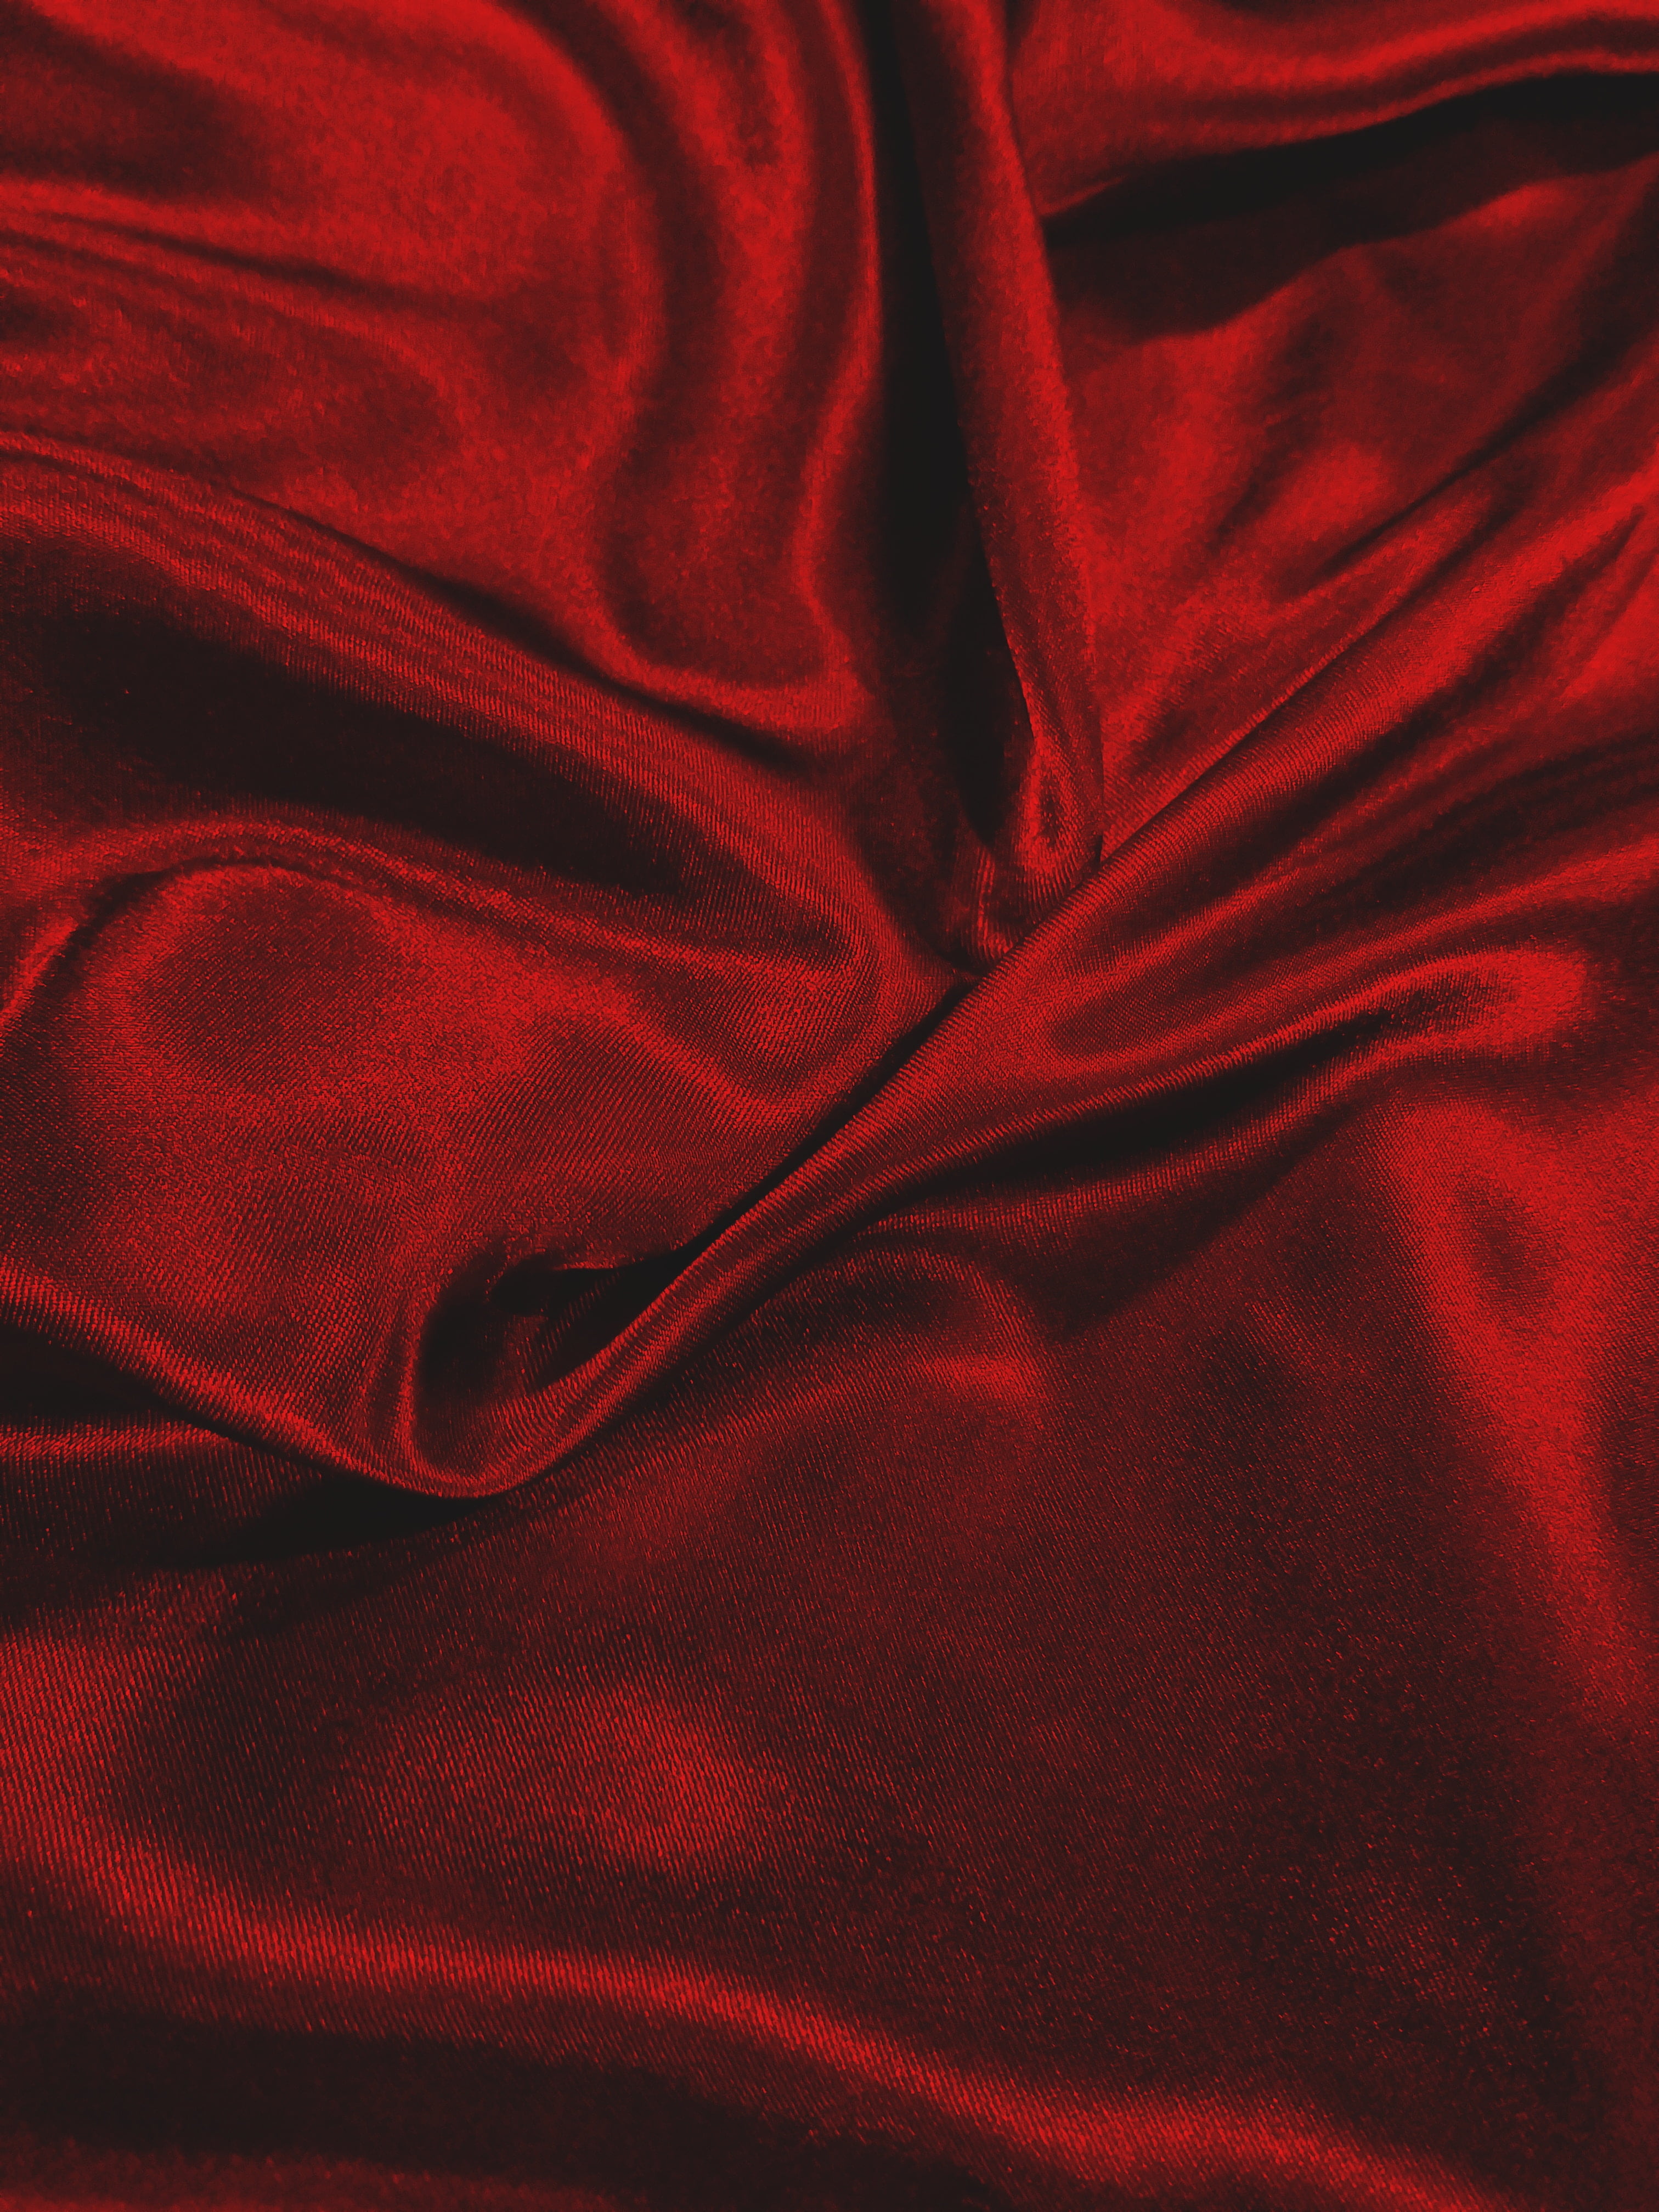 red textile, fabric, glitter, folds, satin, backgrounds, silk